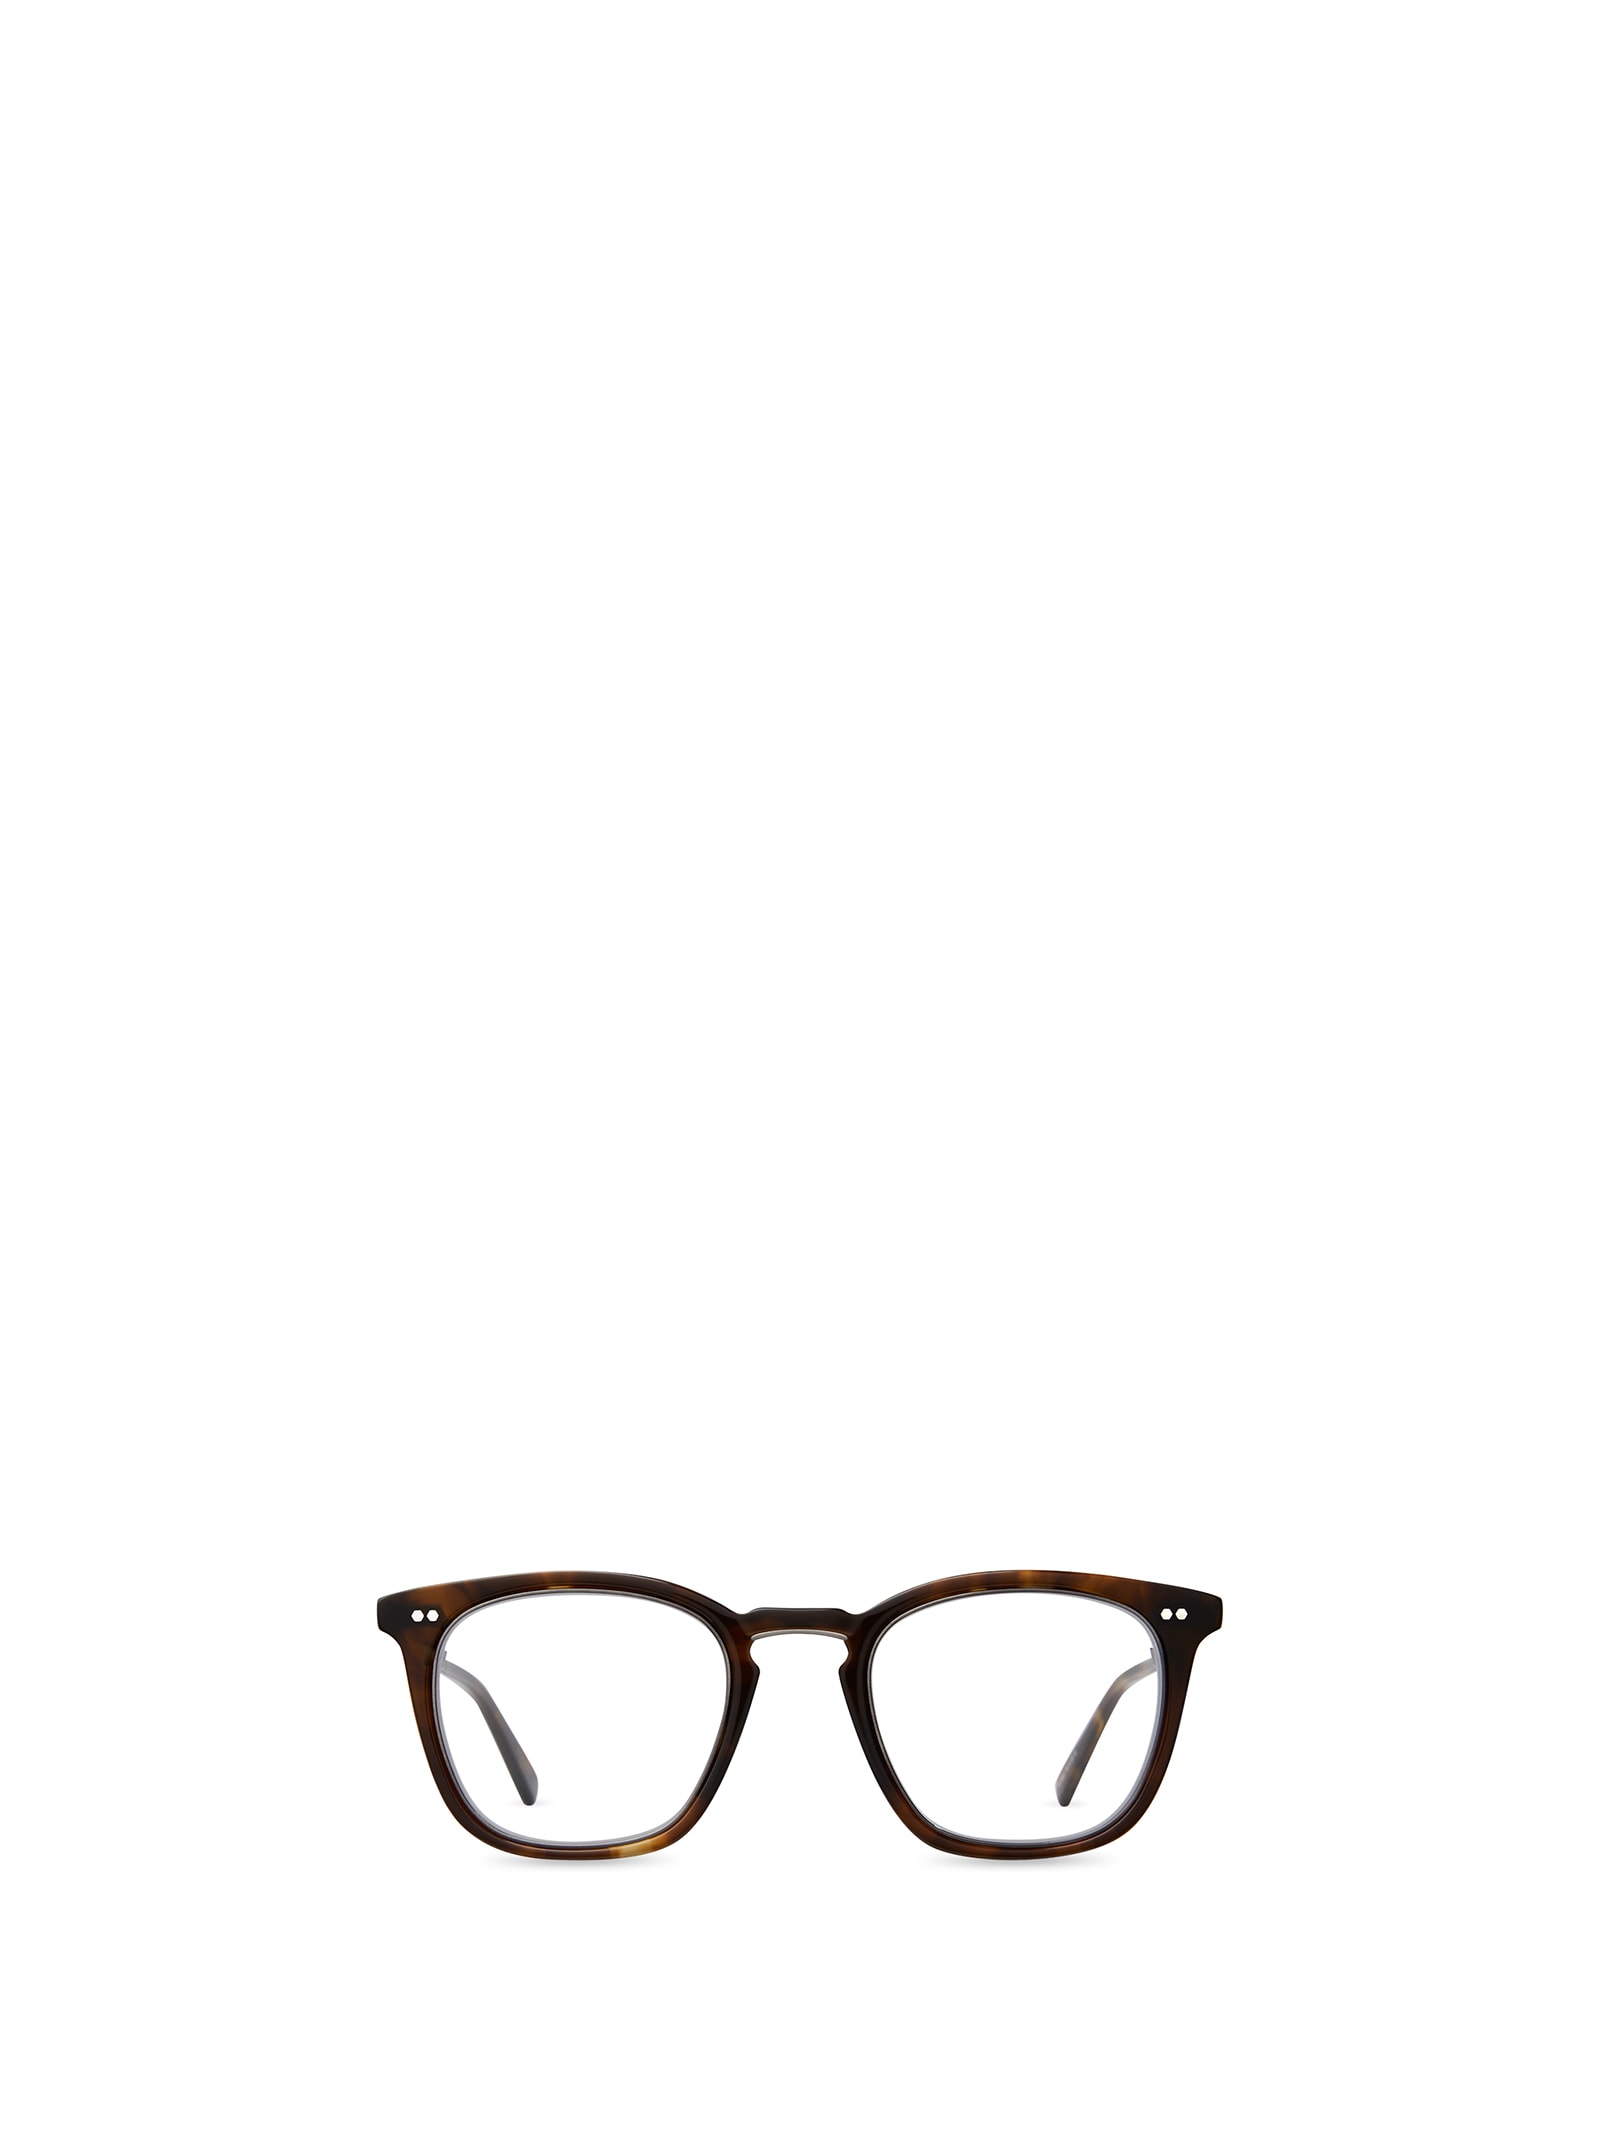 MR LEIGHT GETTY II C CACAO TORTOISE-PEWTER GLASSES